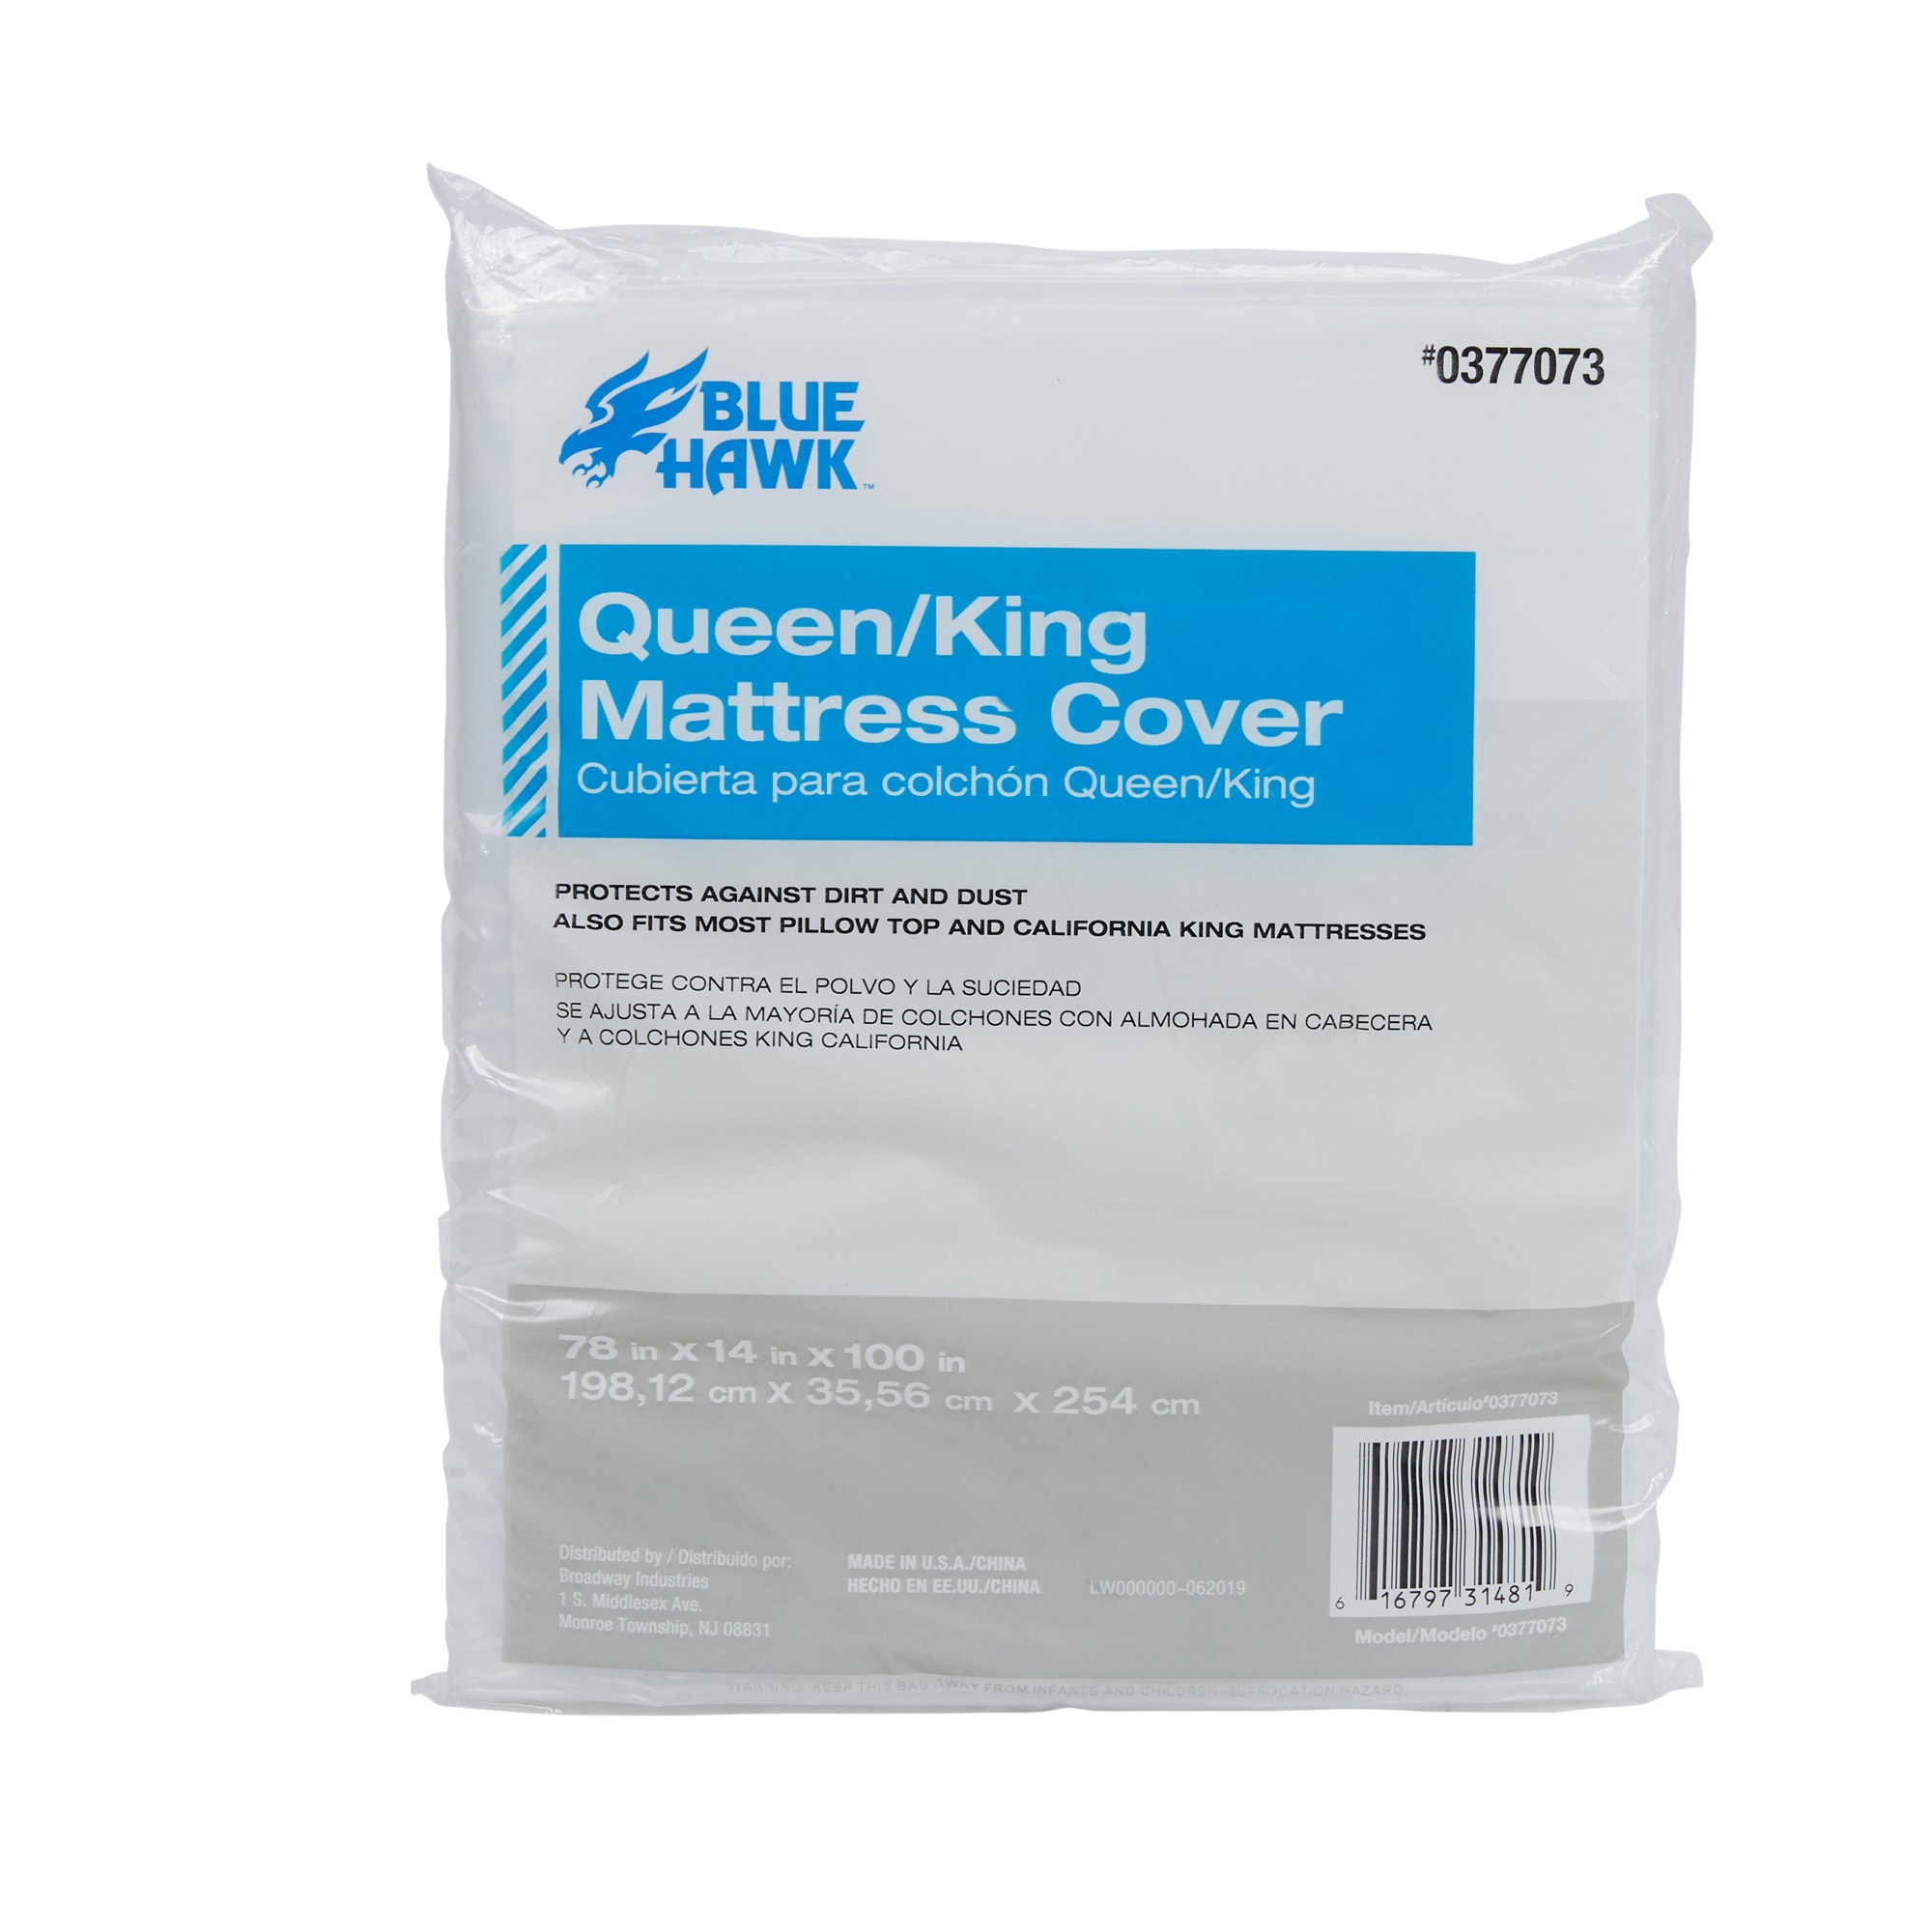 Bag for Storage Plastic King Queen Mattress or Moving 78 x 14 x 100” 